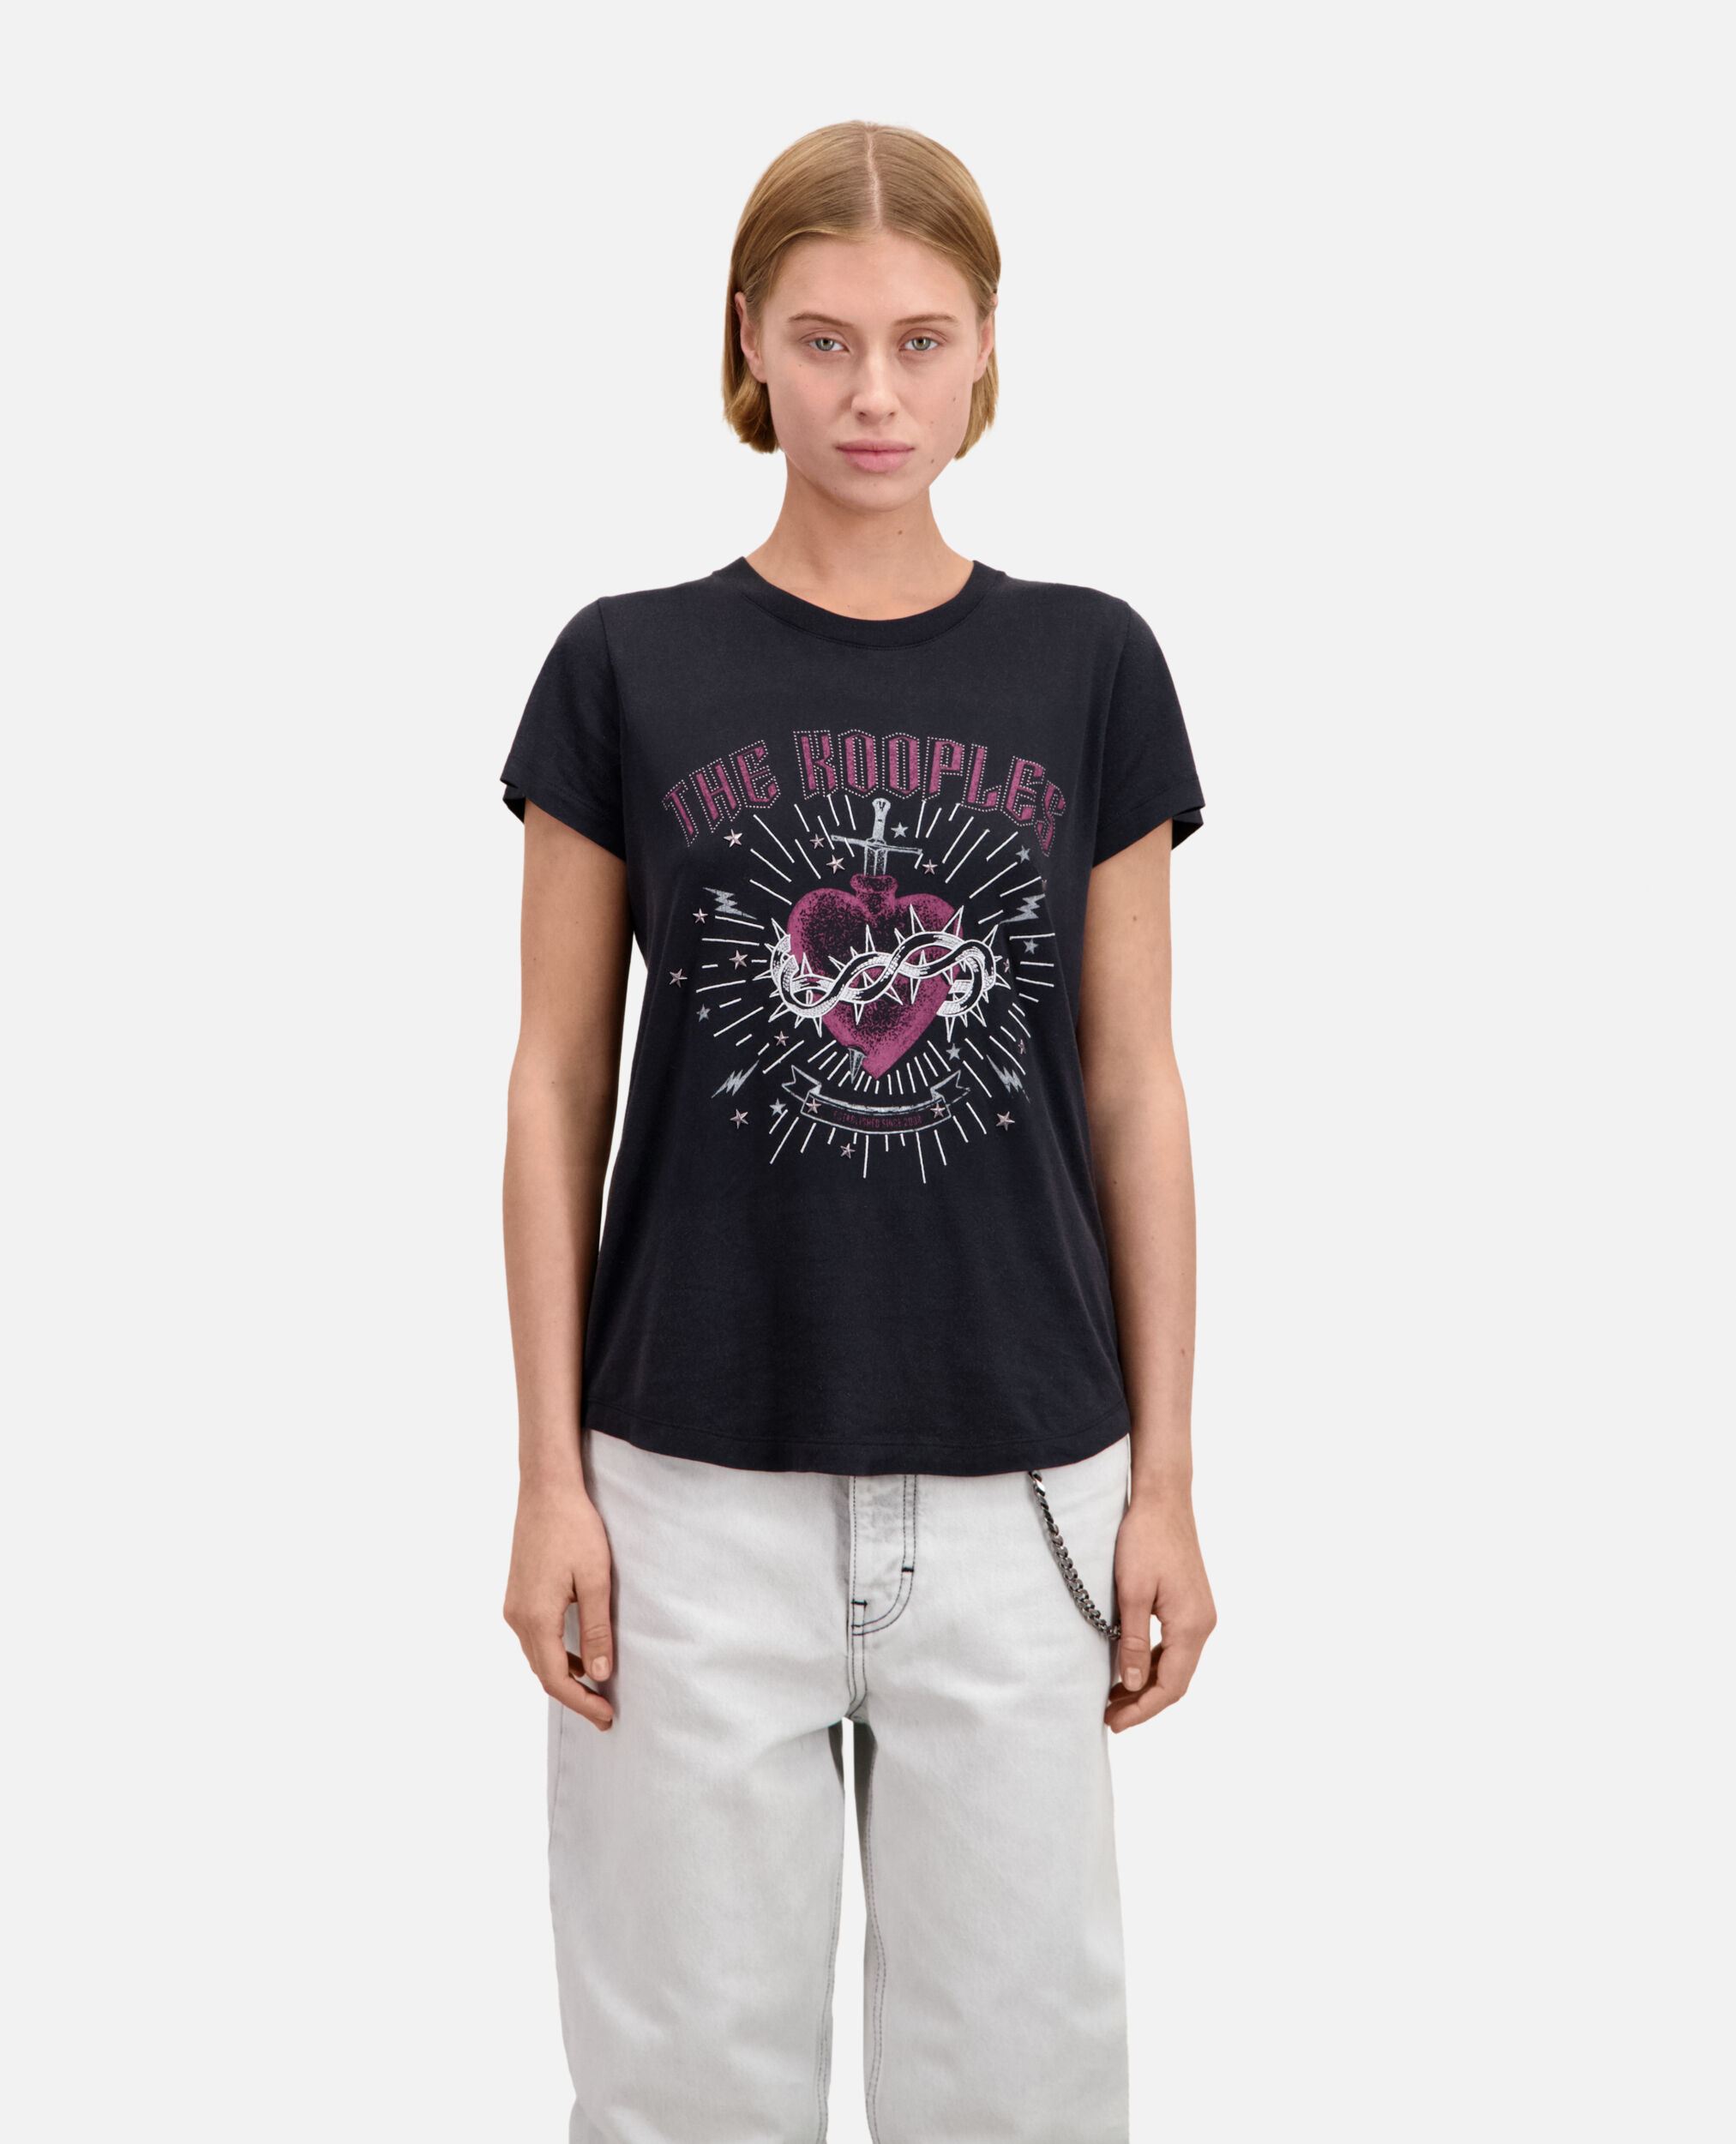 Women's black t-shirt with dagger through heart serigraphy, BLACK, hi-res image number null